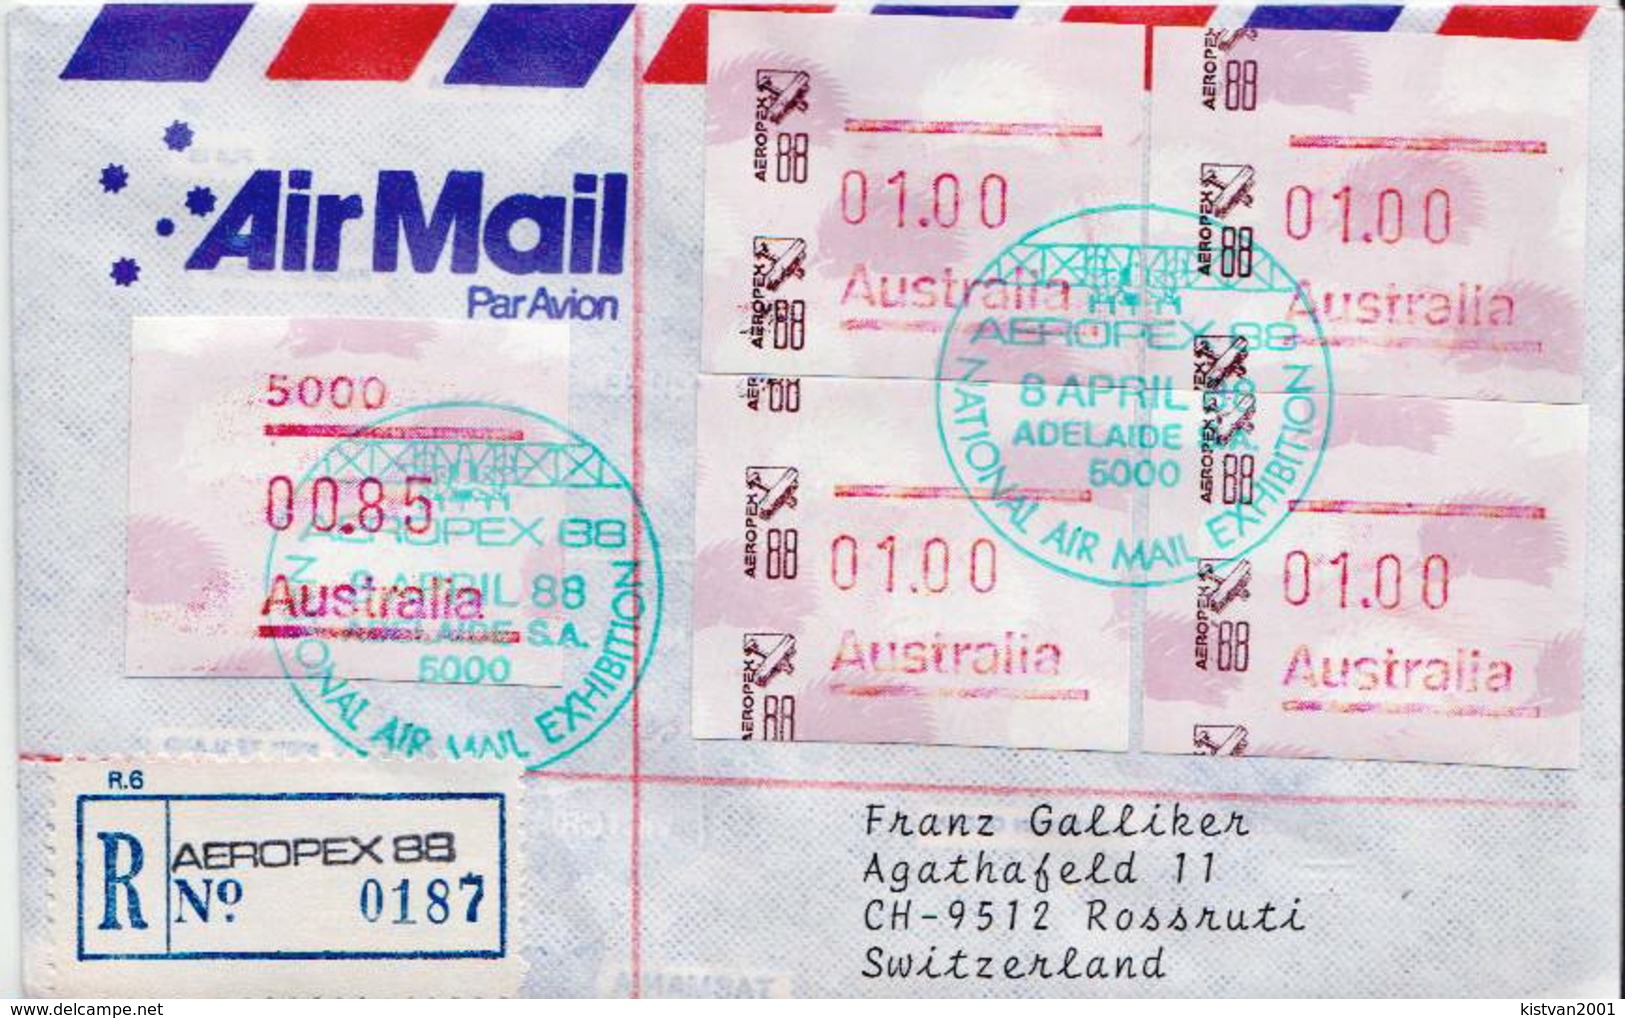 Postal History Cover: Australia R Cover With Automat Stamps - Machine Labels [ATM]